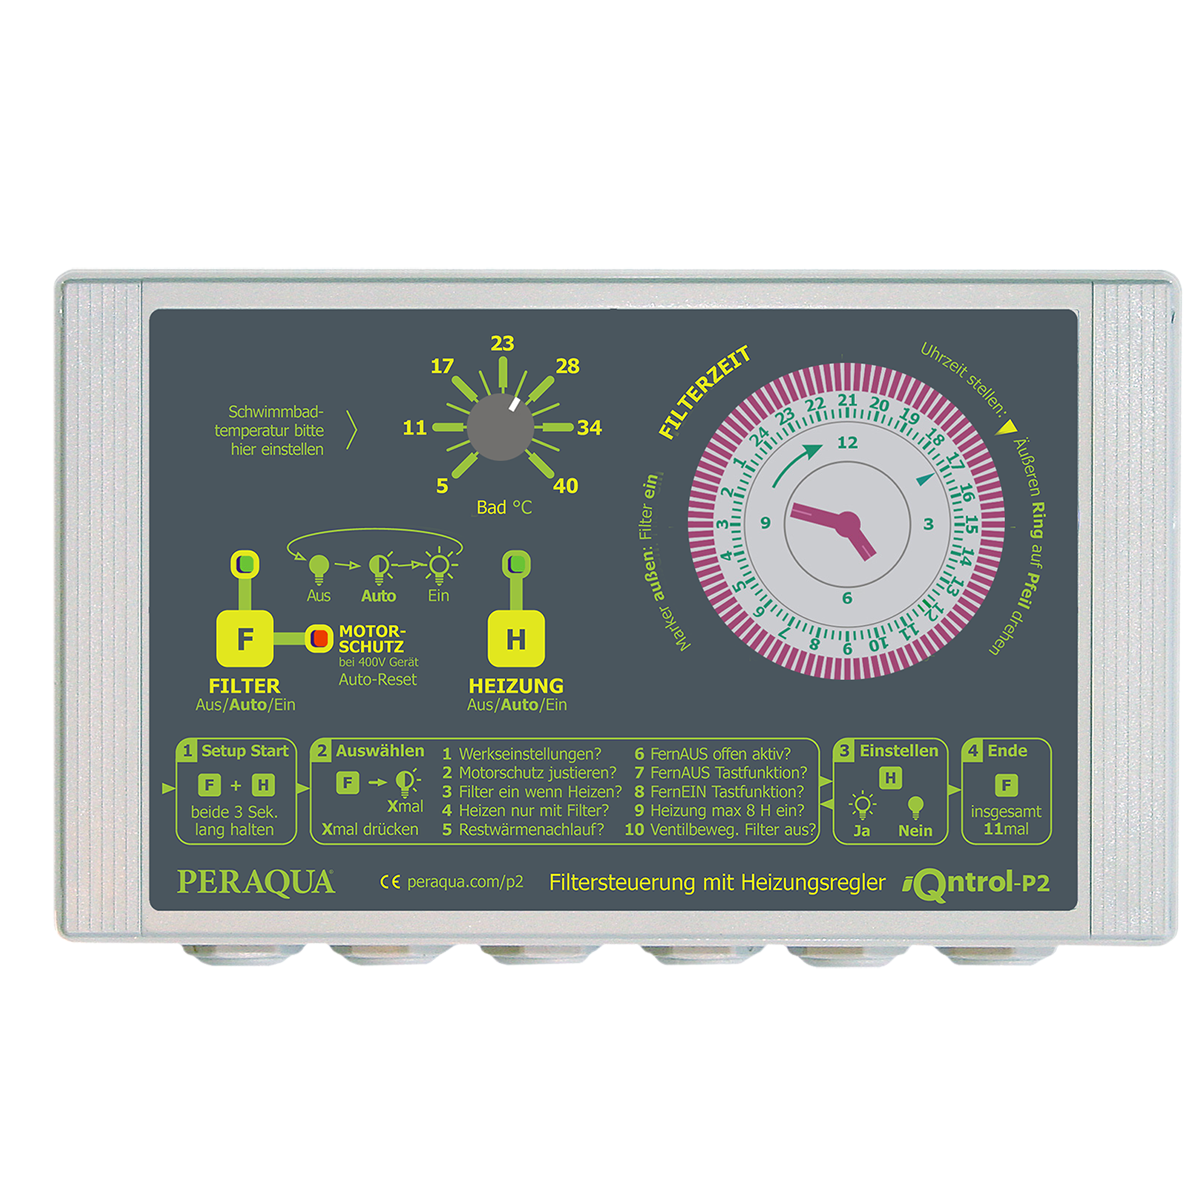 iQntrol-P2 heating filter control 400 with manual adjustment of pool temperature, with smart motor protection 0,7 – 7,5A for pumps 250W-4kW, with temperature sensor brass chromed d10 and immersion probe ½“ iQntrol-P2 heating filter control 400 with manual adjustment of pool temperature, with smart motor protection 0,7 – 7,5A for pumps 250W-4kW, with temperature sensor brass chromed d10 and immersion probe ½“